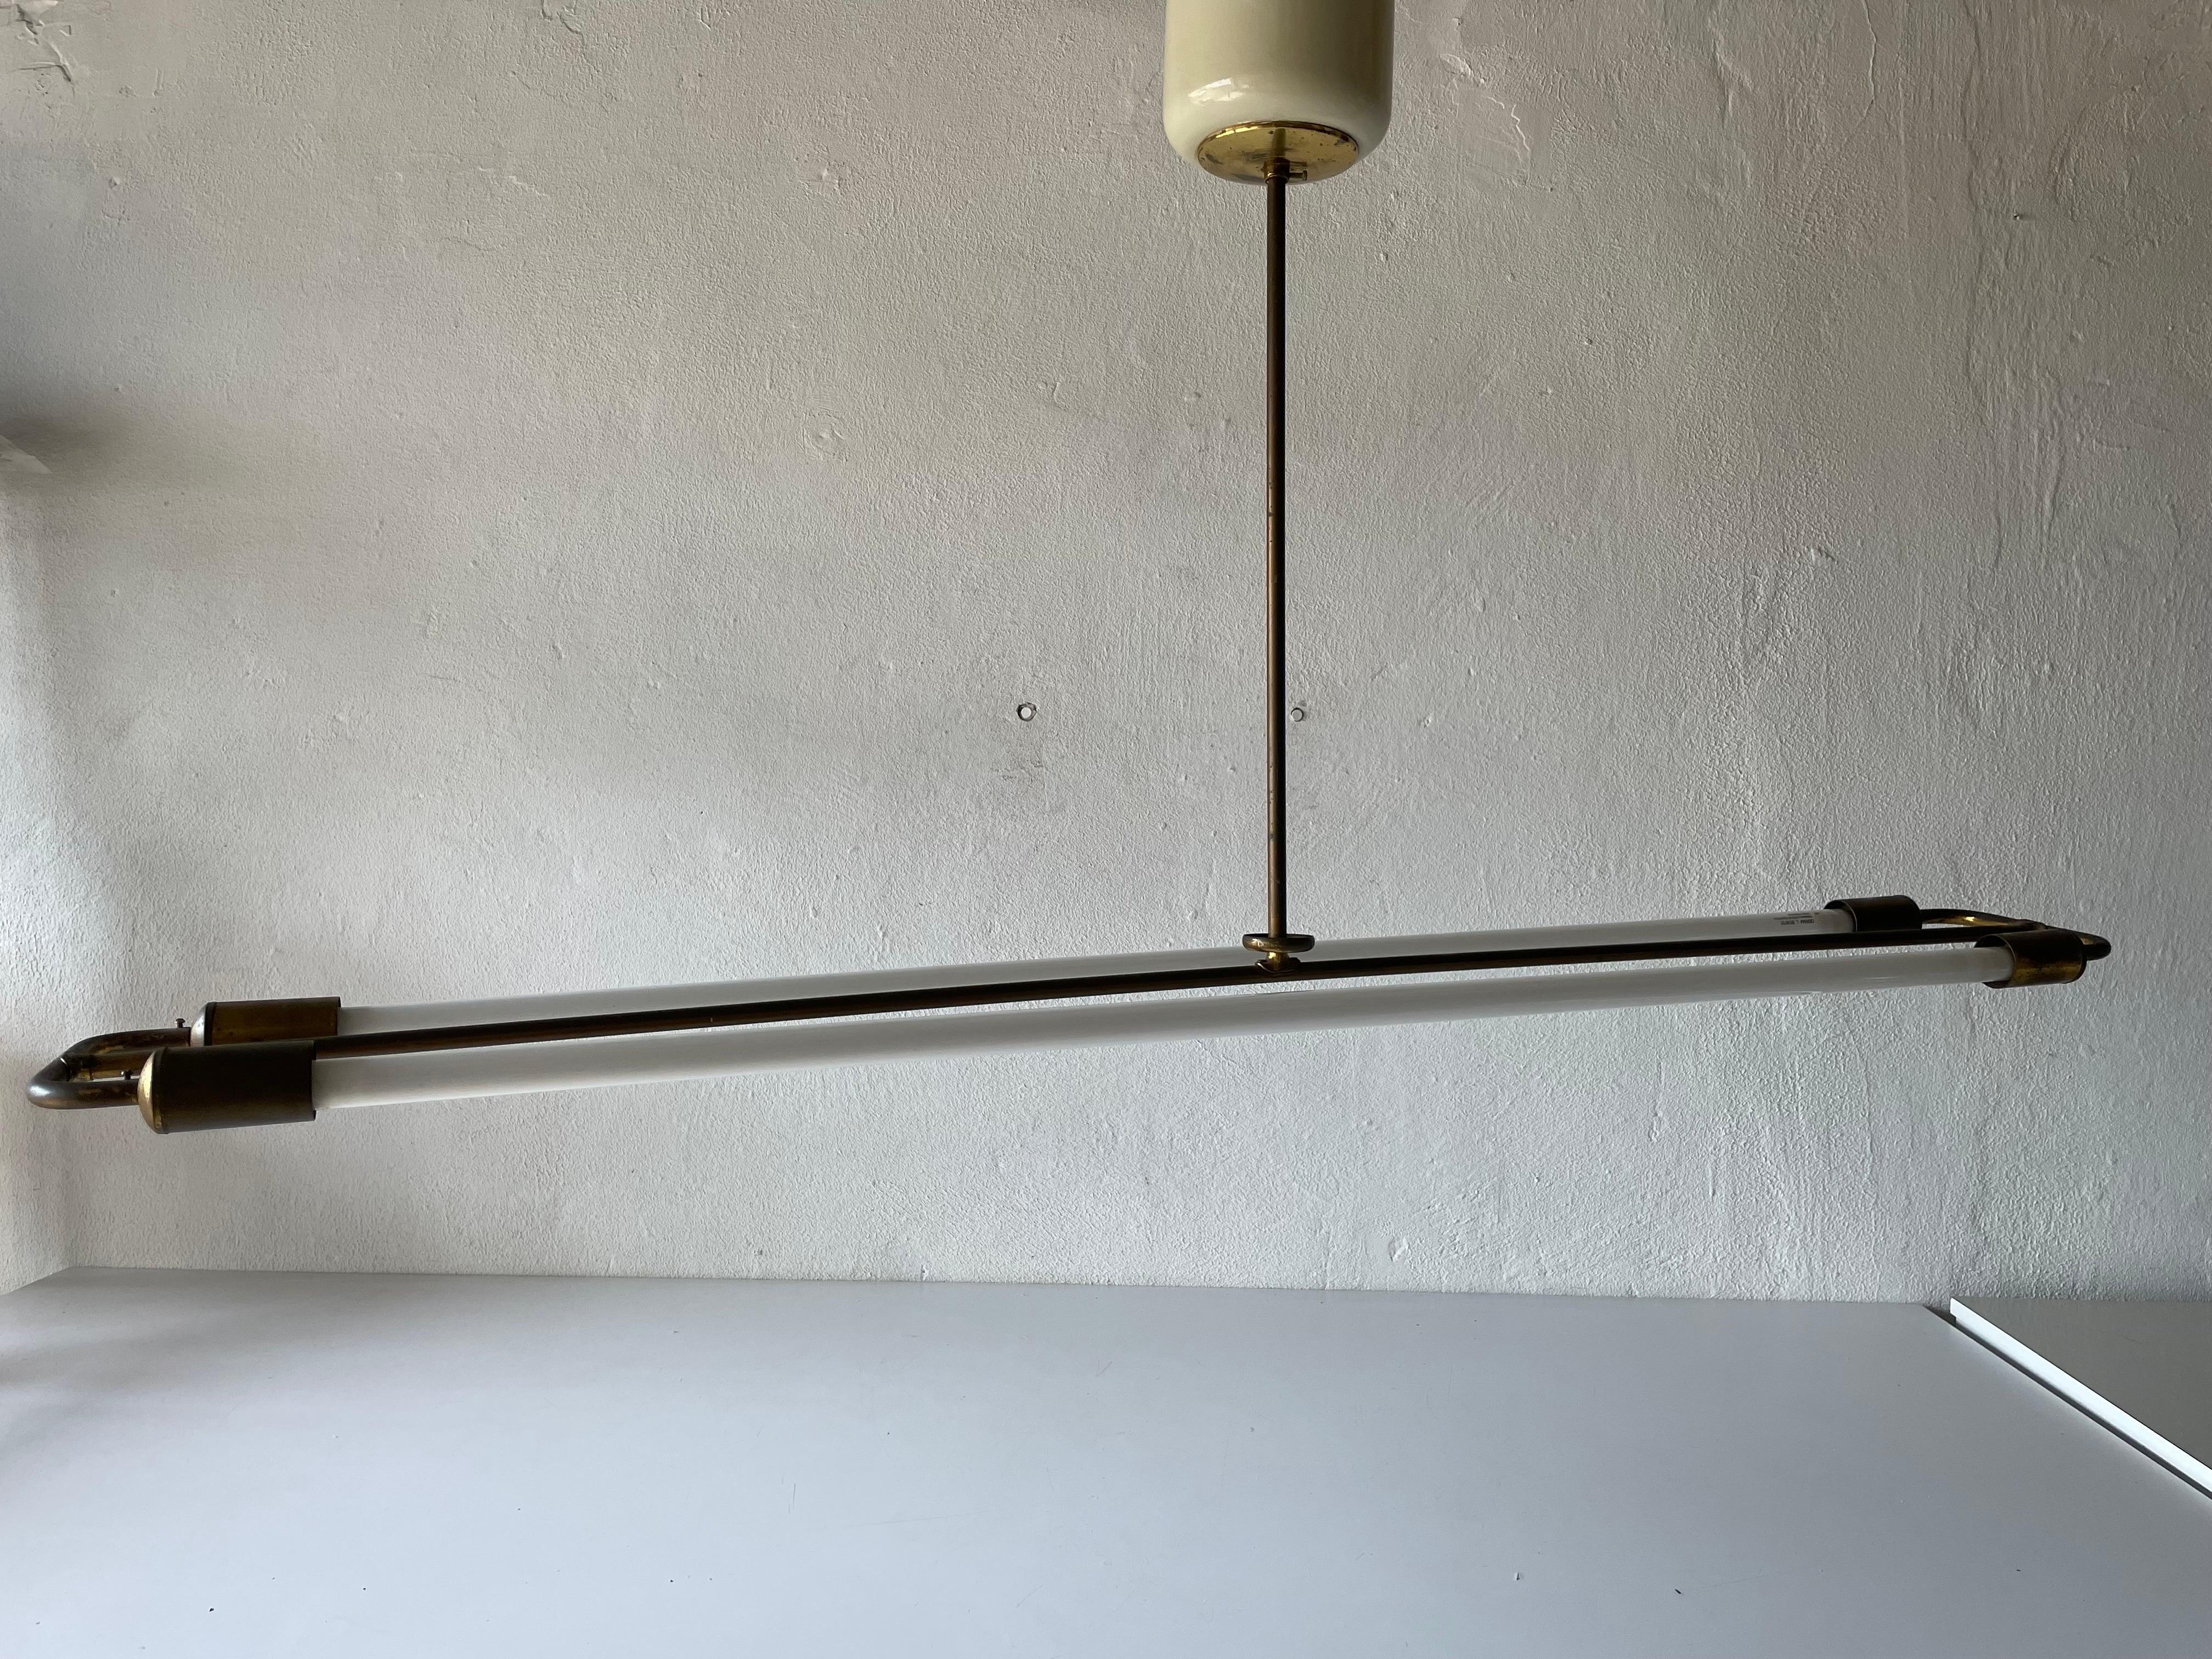 Brass Art Deco Bauhaus chandelier by Kaiser & Co., 1930s, Germany

Industrial ceiling lamp with two fluorescent Tubes

Lampshade is in very good vintage condition.
Original canopy.

This lamp works with 2 fluorescent Tubes.
Wired and